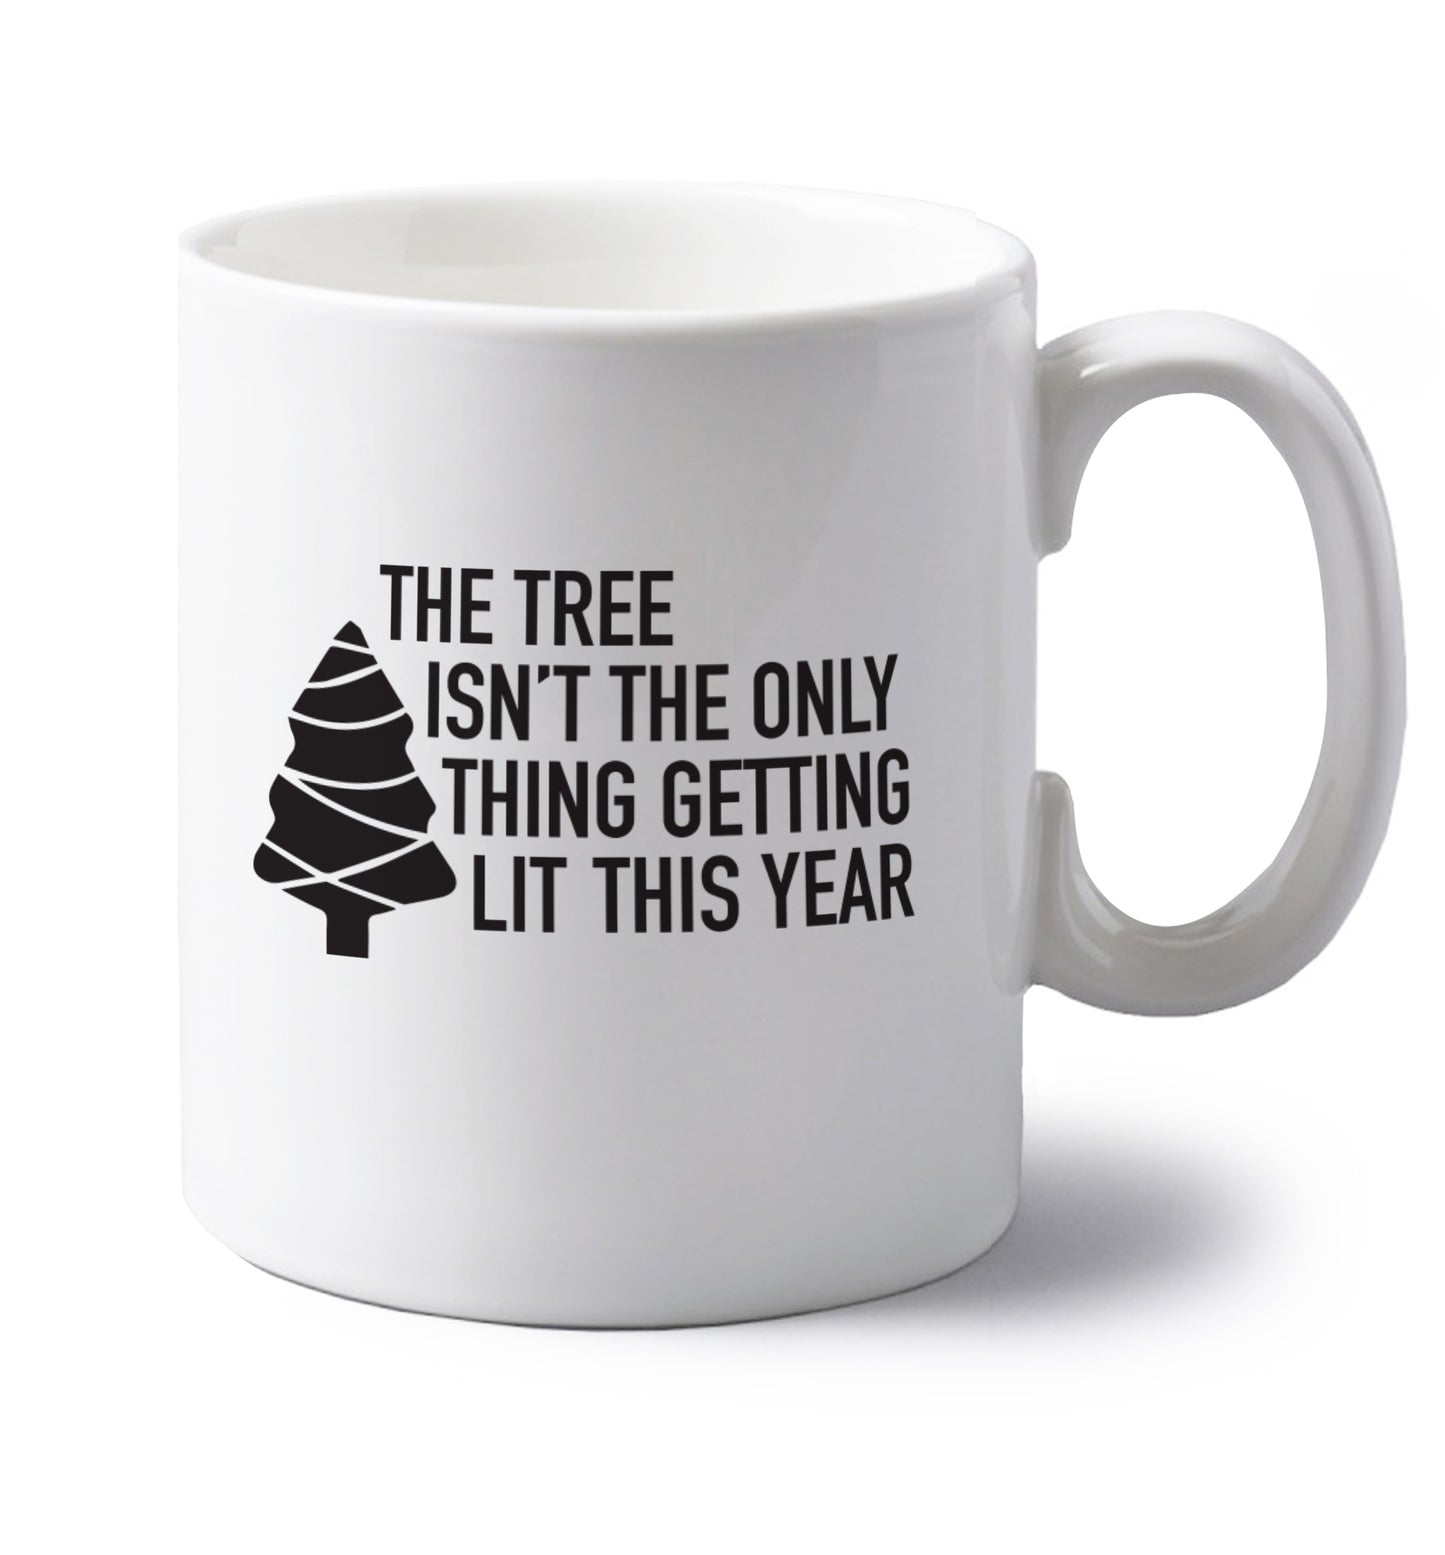 The tree isn't the only thing getting lit this year left handed white ceramic mug 